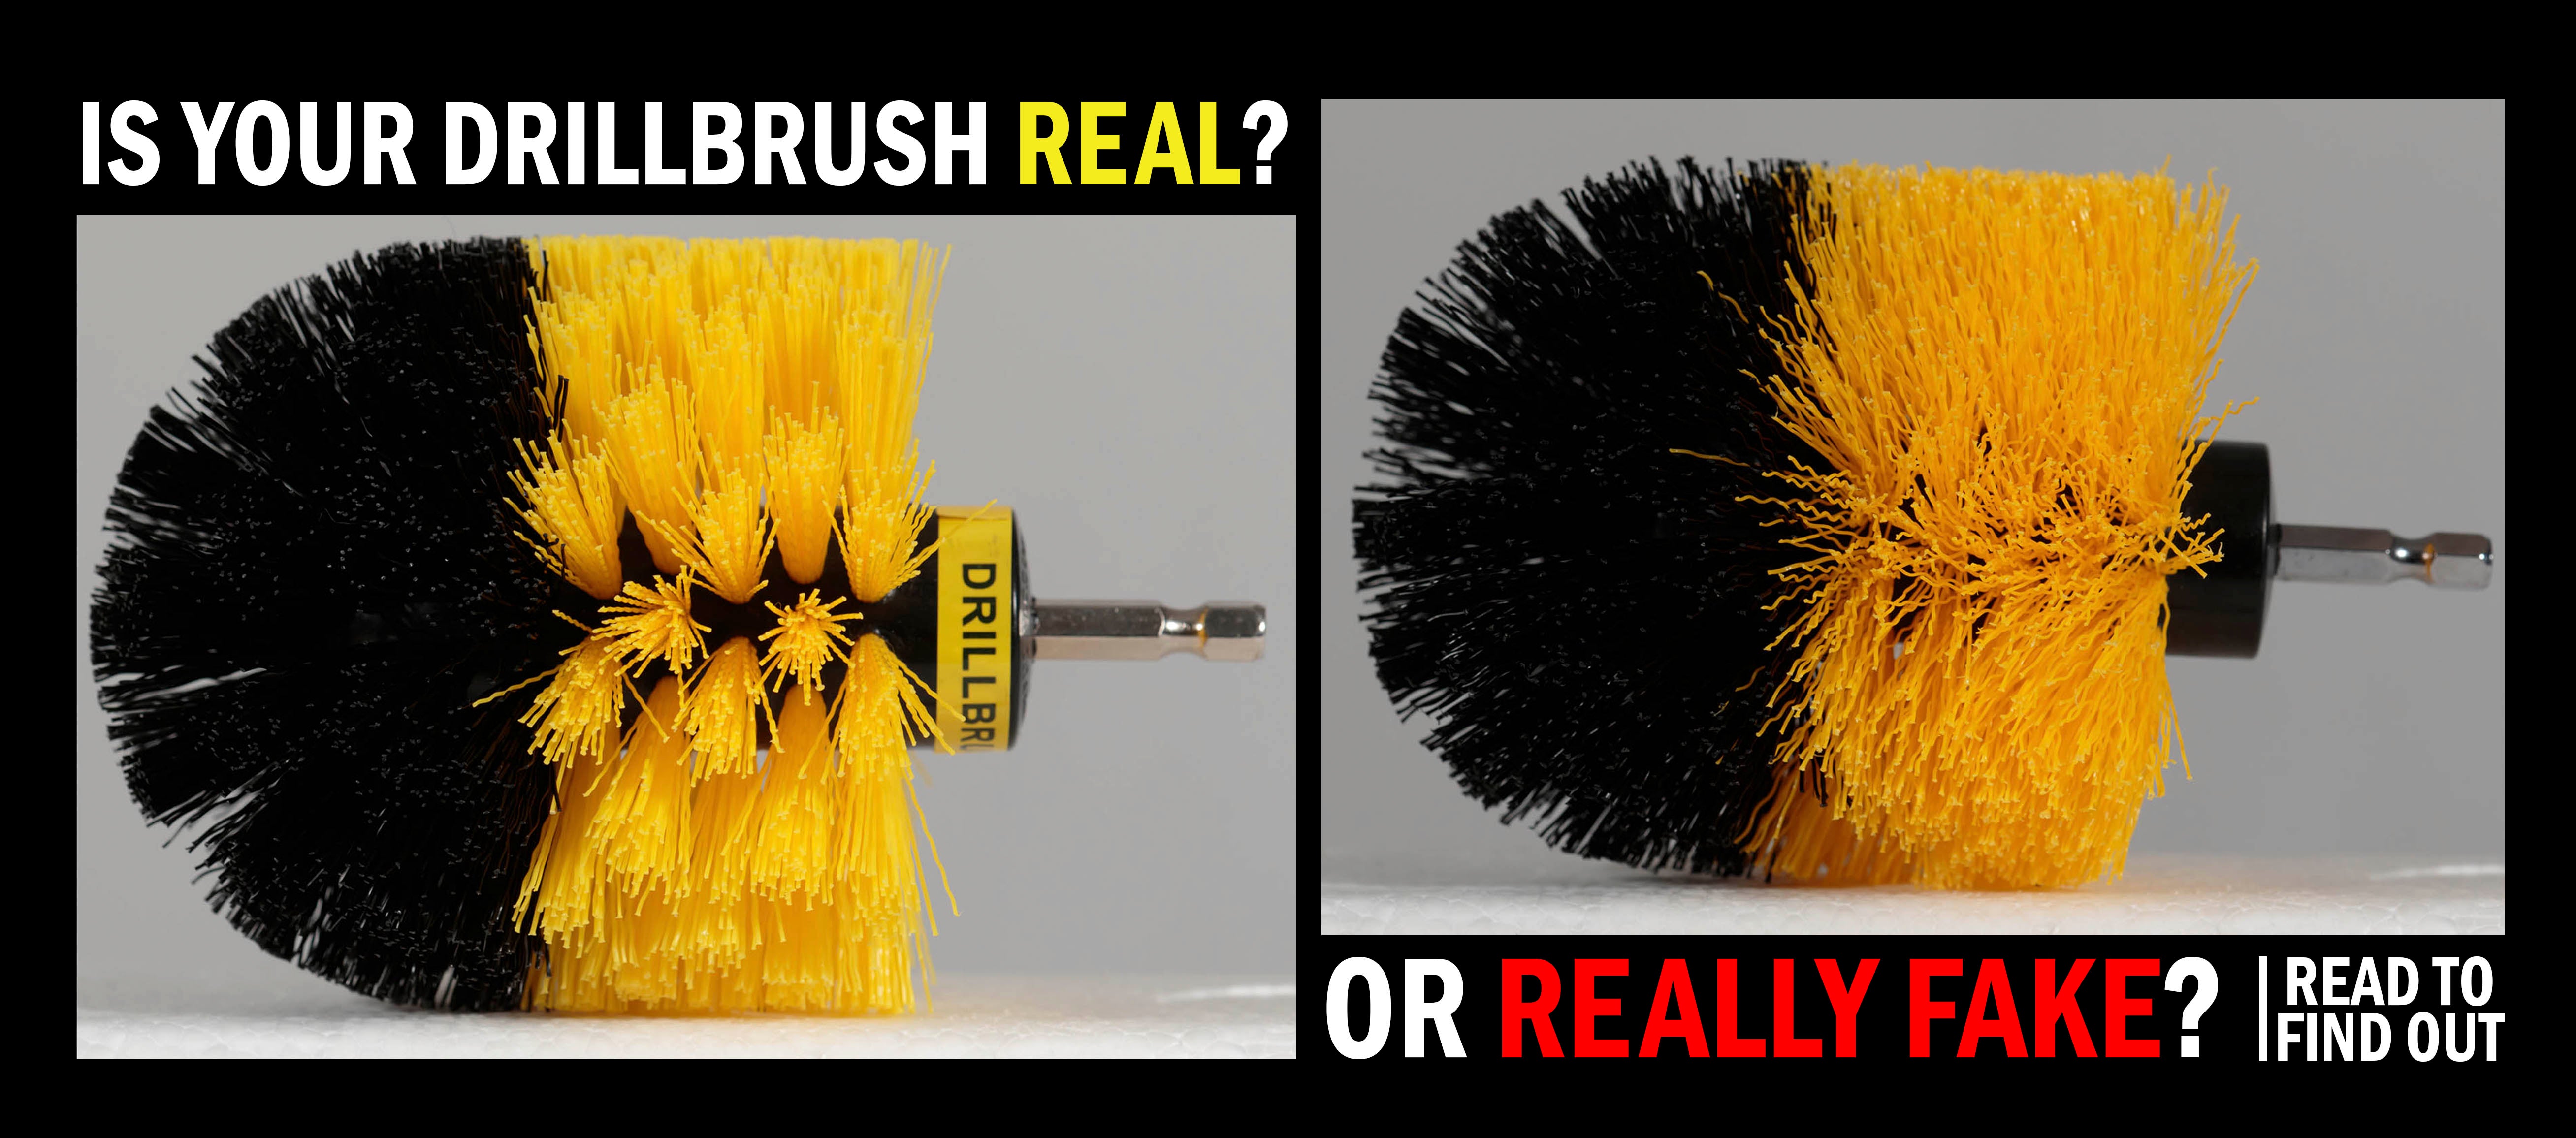 Is Your Drillbrush Real or Really Fake? - How to Spot a Genuine Drillbrush Power Scrubber